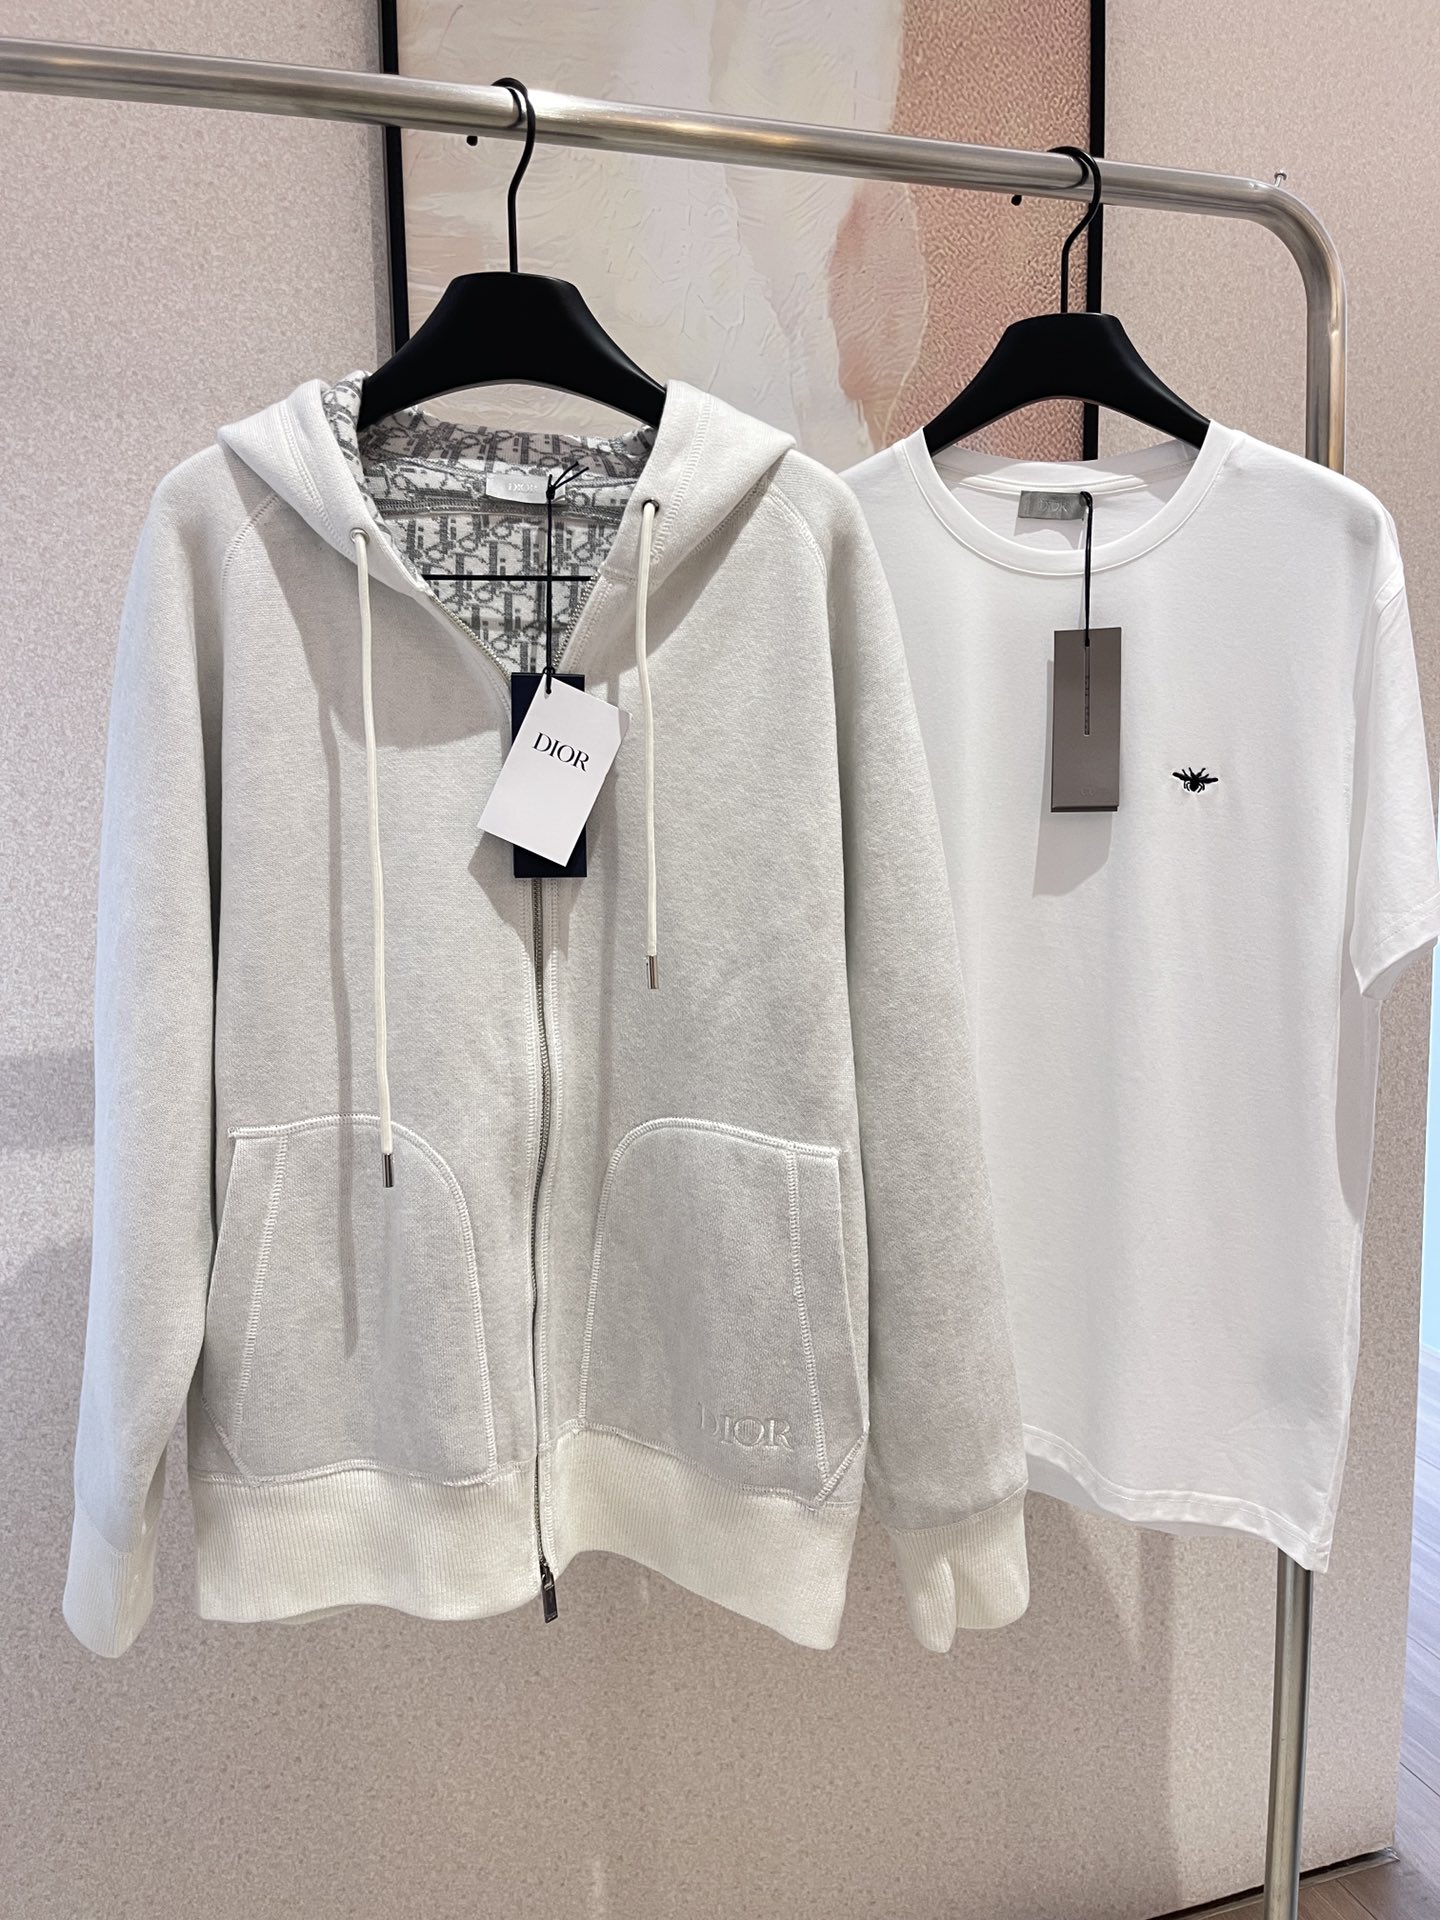 Online From China Designer
 Dior Clothing Cardigans Sweatshirts Best Quality Replica
 Printing Cashmere Cotton